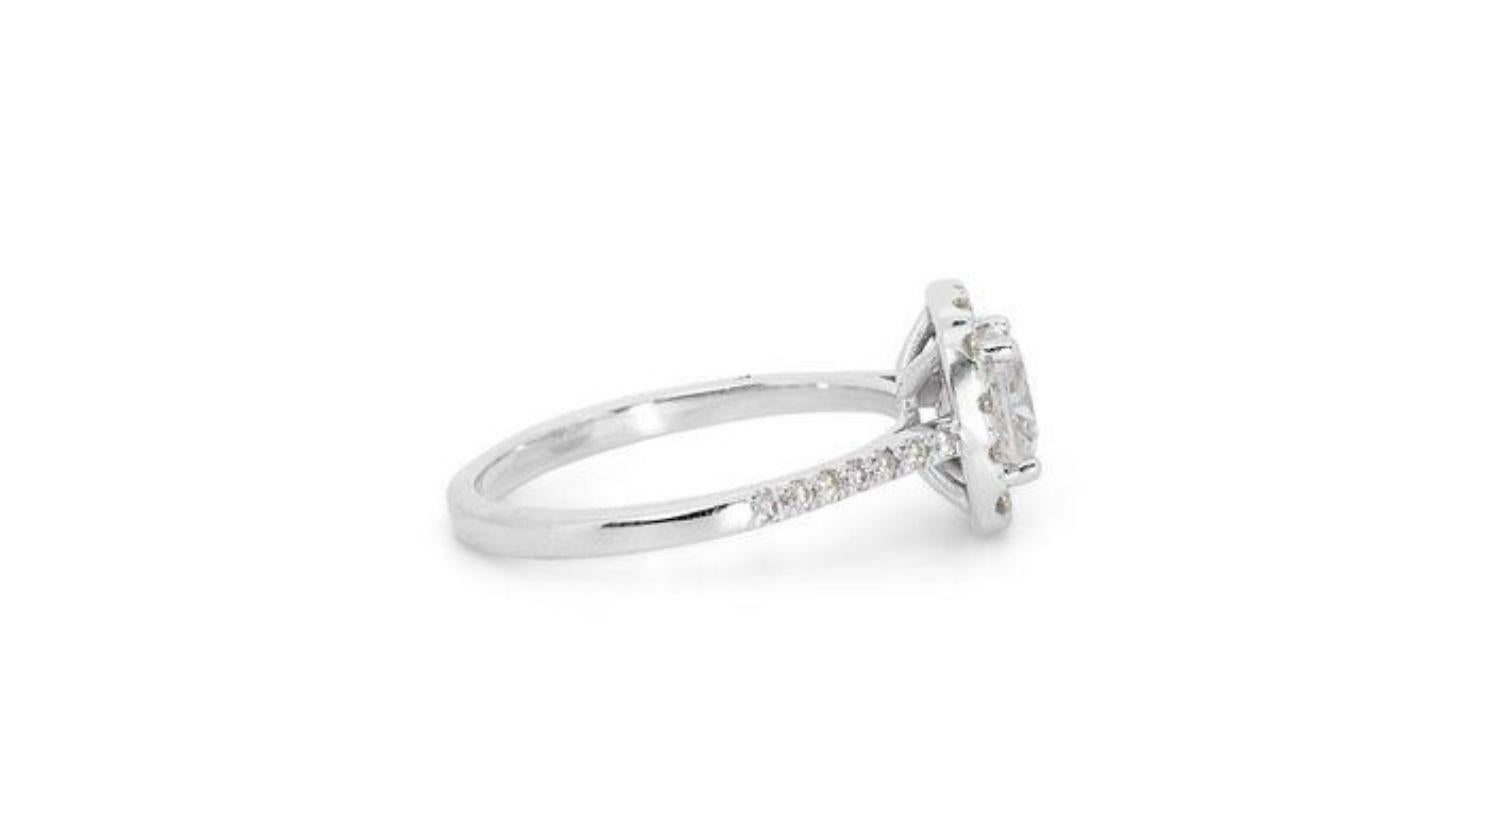 Exquisite 1.47ct Cushion Cut Diamond Ring set in 18K White Gold In New Condition For Sale In רמת גן, IL